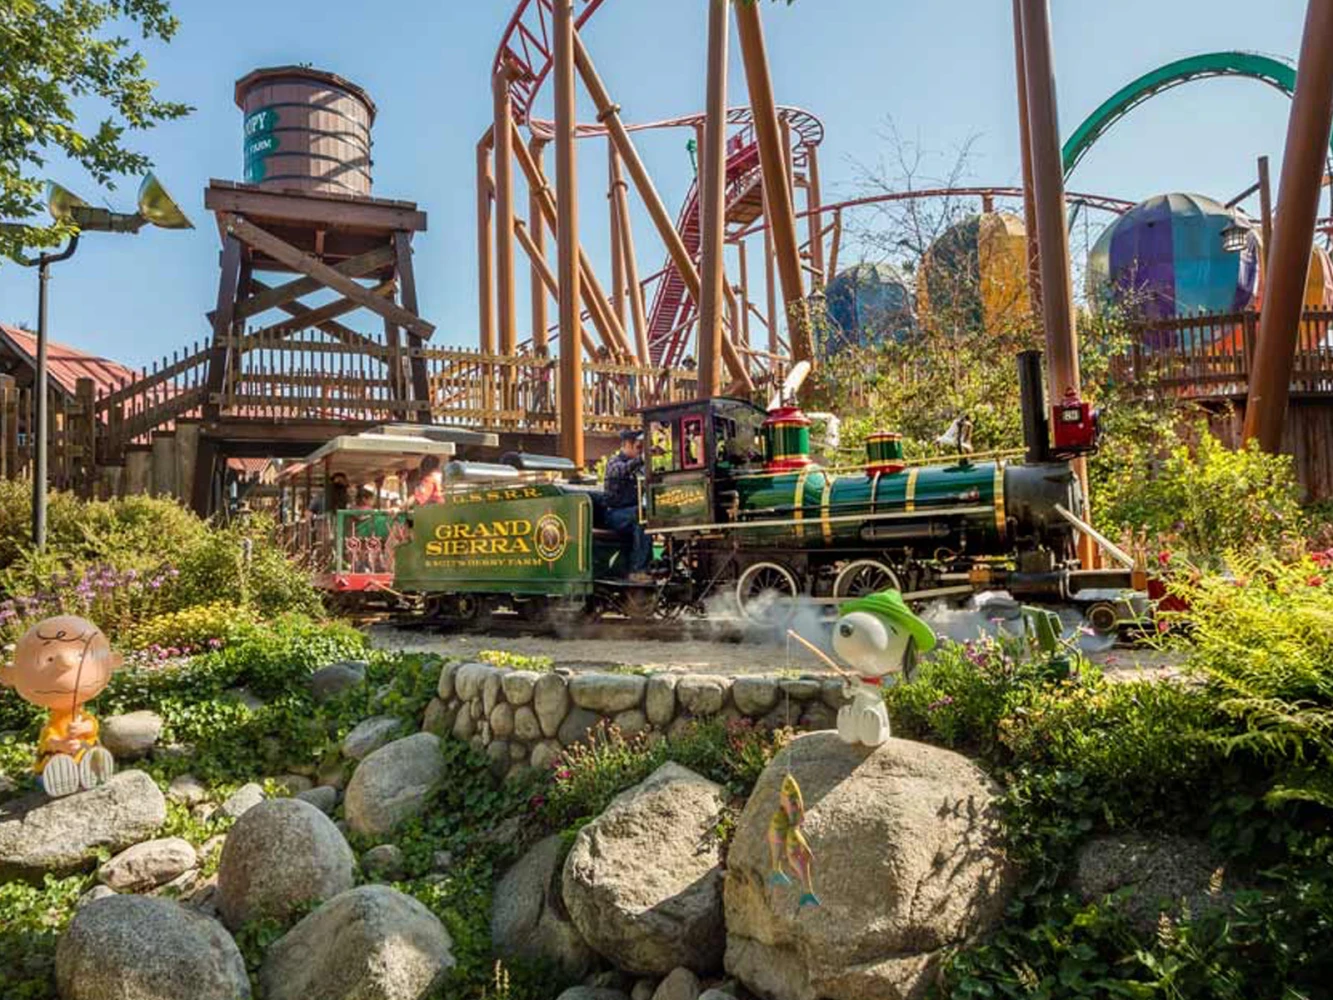 Knott's Berry Farm: What to expect - 5